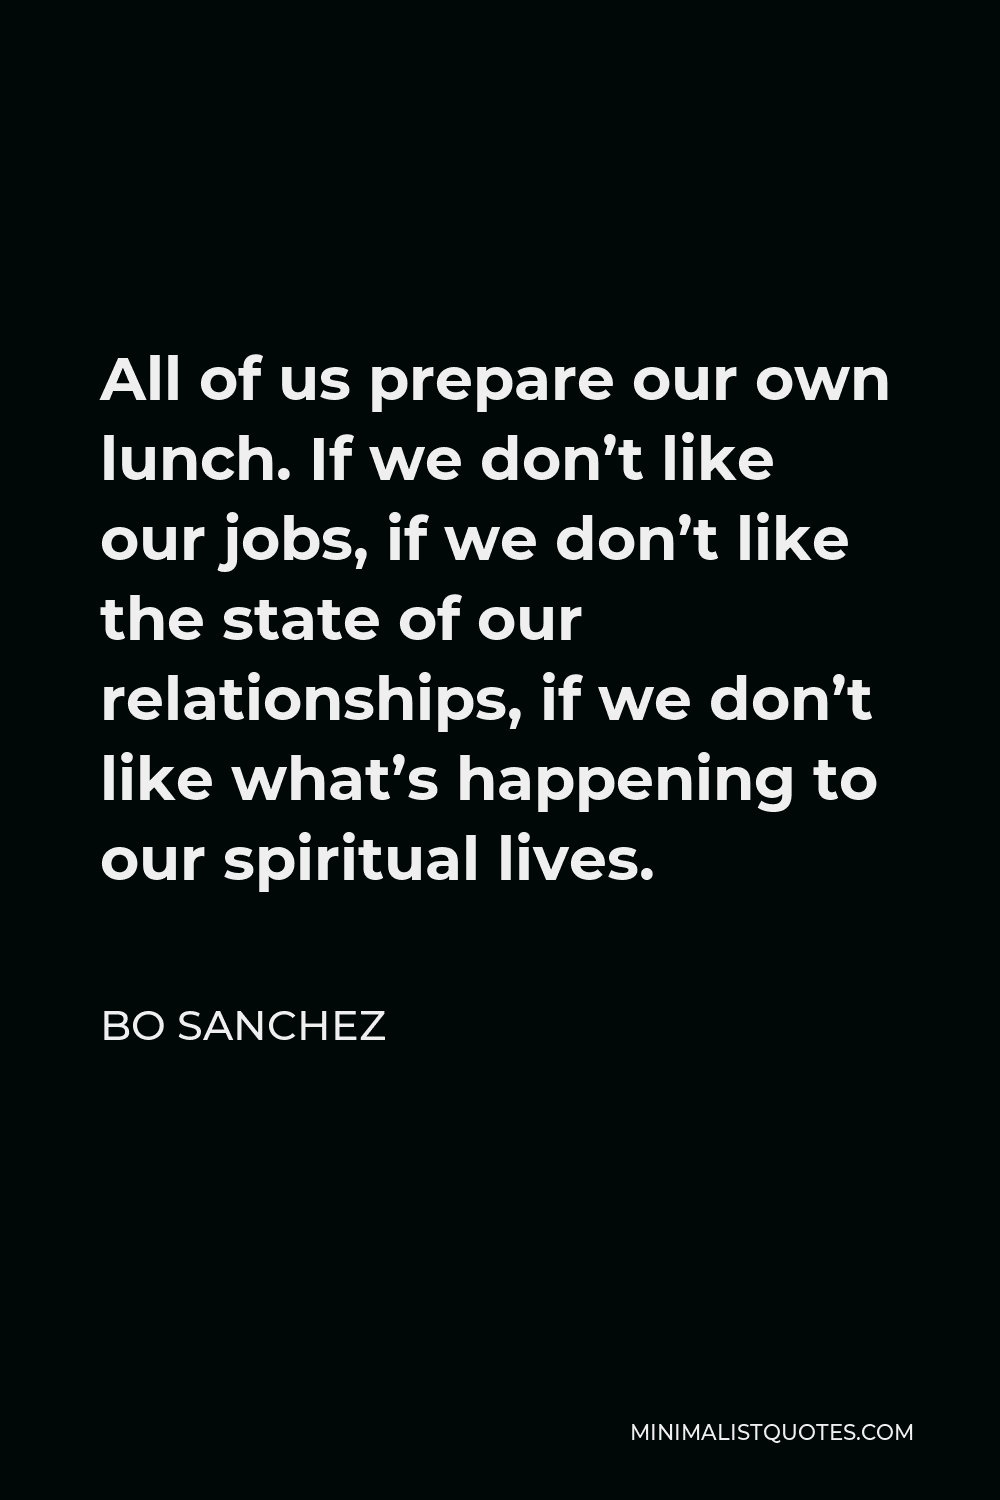 Bo Sanchez Quote - All of us prepare our own lunch. If we don’t like our jobs, if we don’t like the state of our relationships, if we don’t like what’s happening to our spiritual lives.